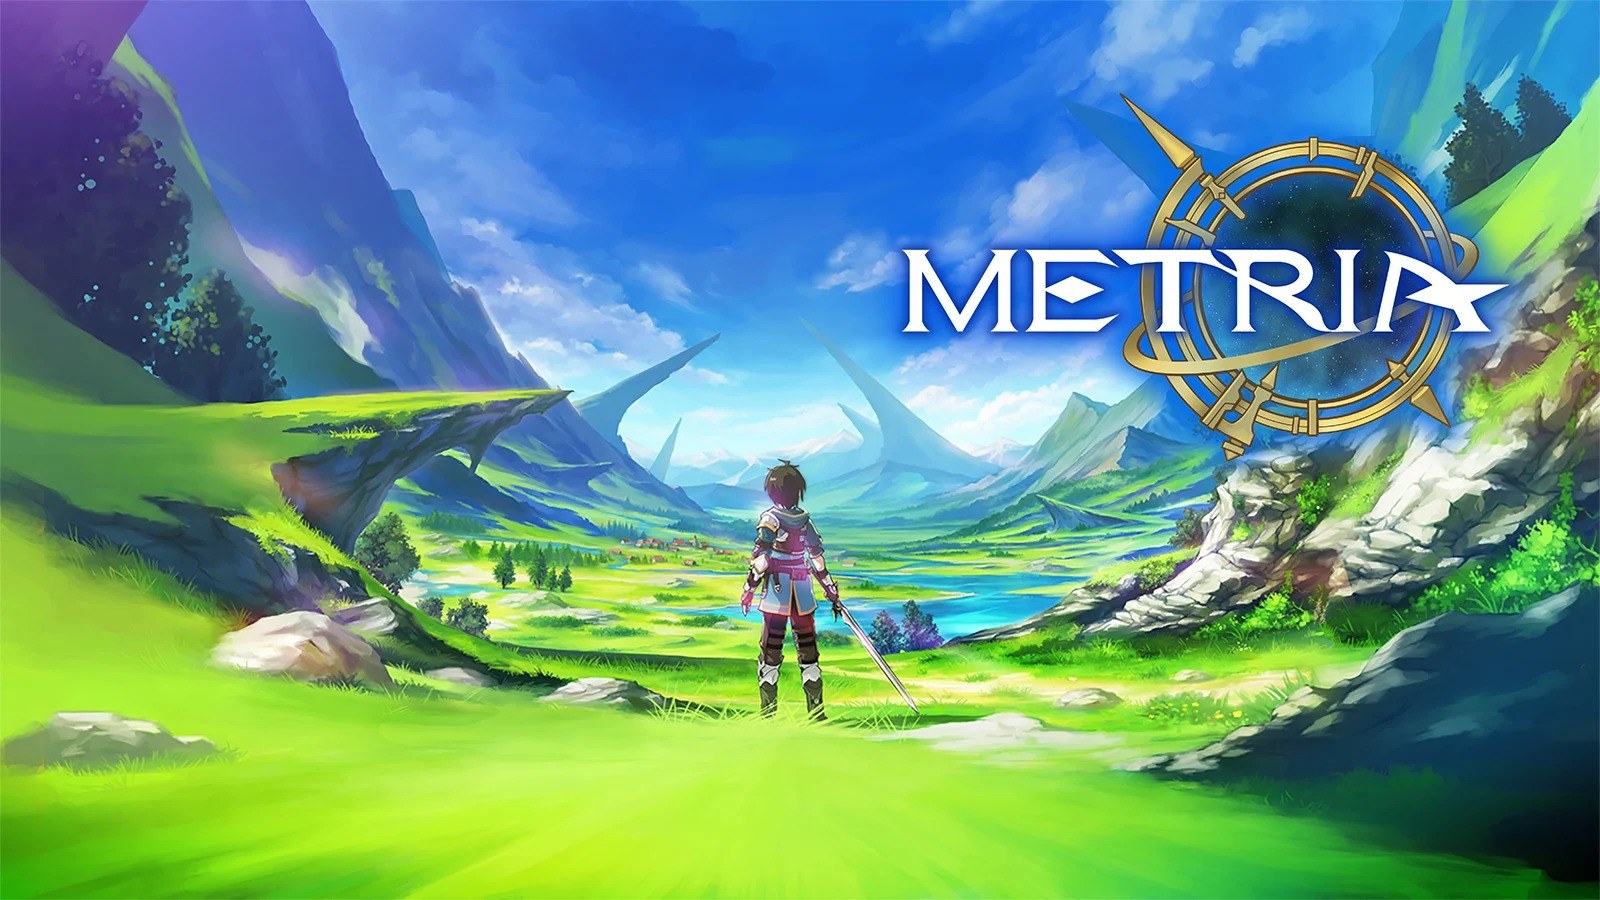 Asobimo’s Metria Open for Pre-Registrations on Android and iOS